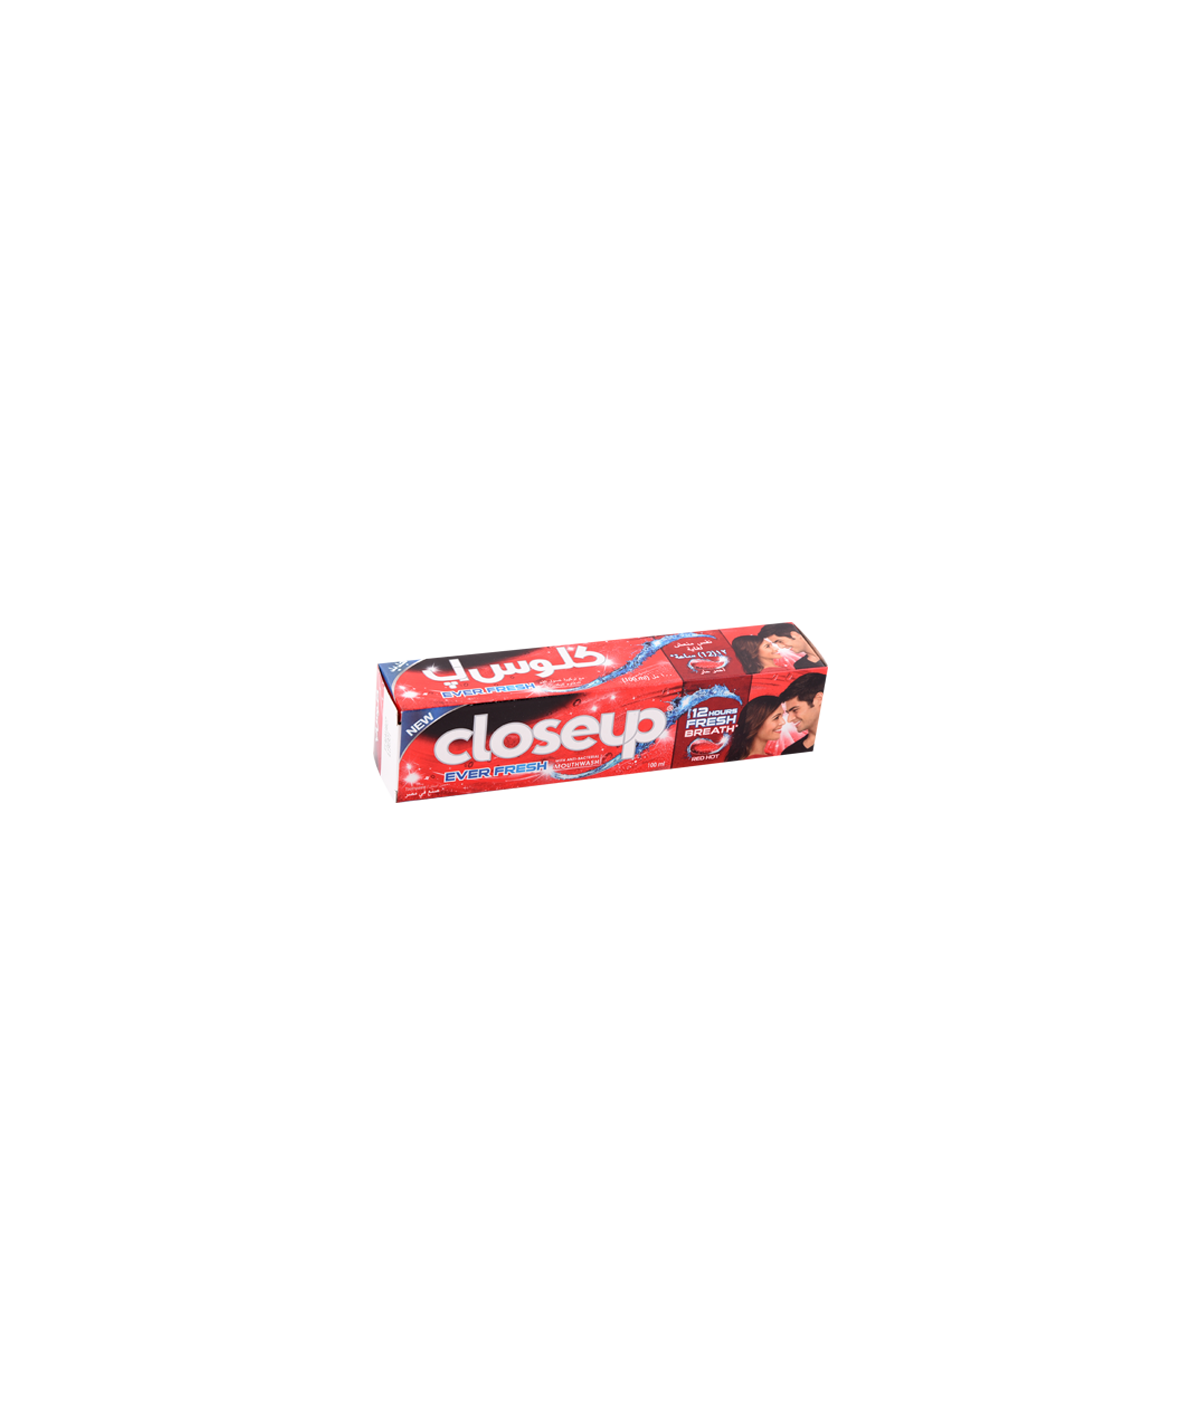 CLOSE UP Dentifrice Red hot...